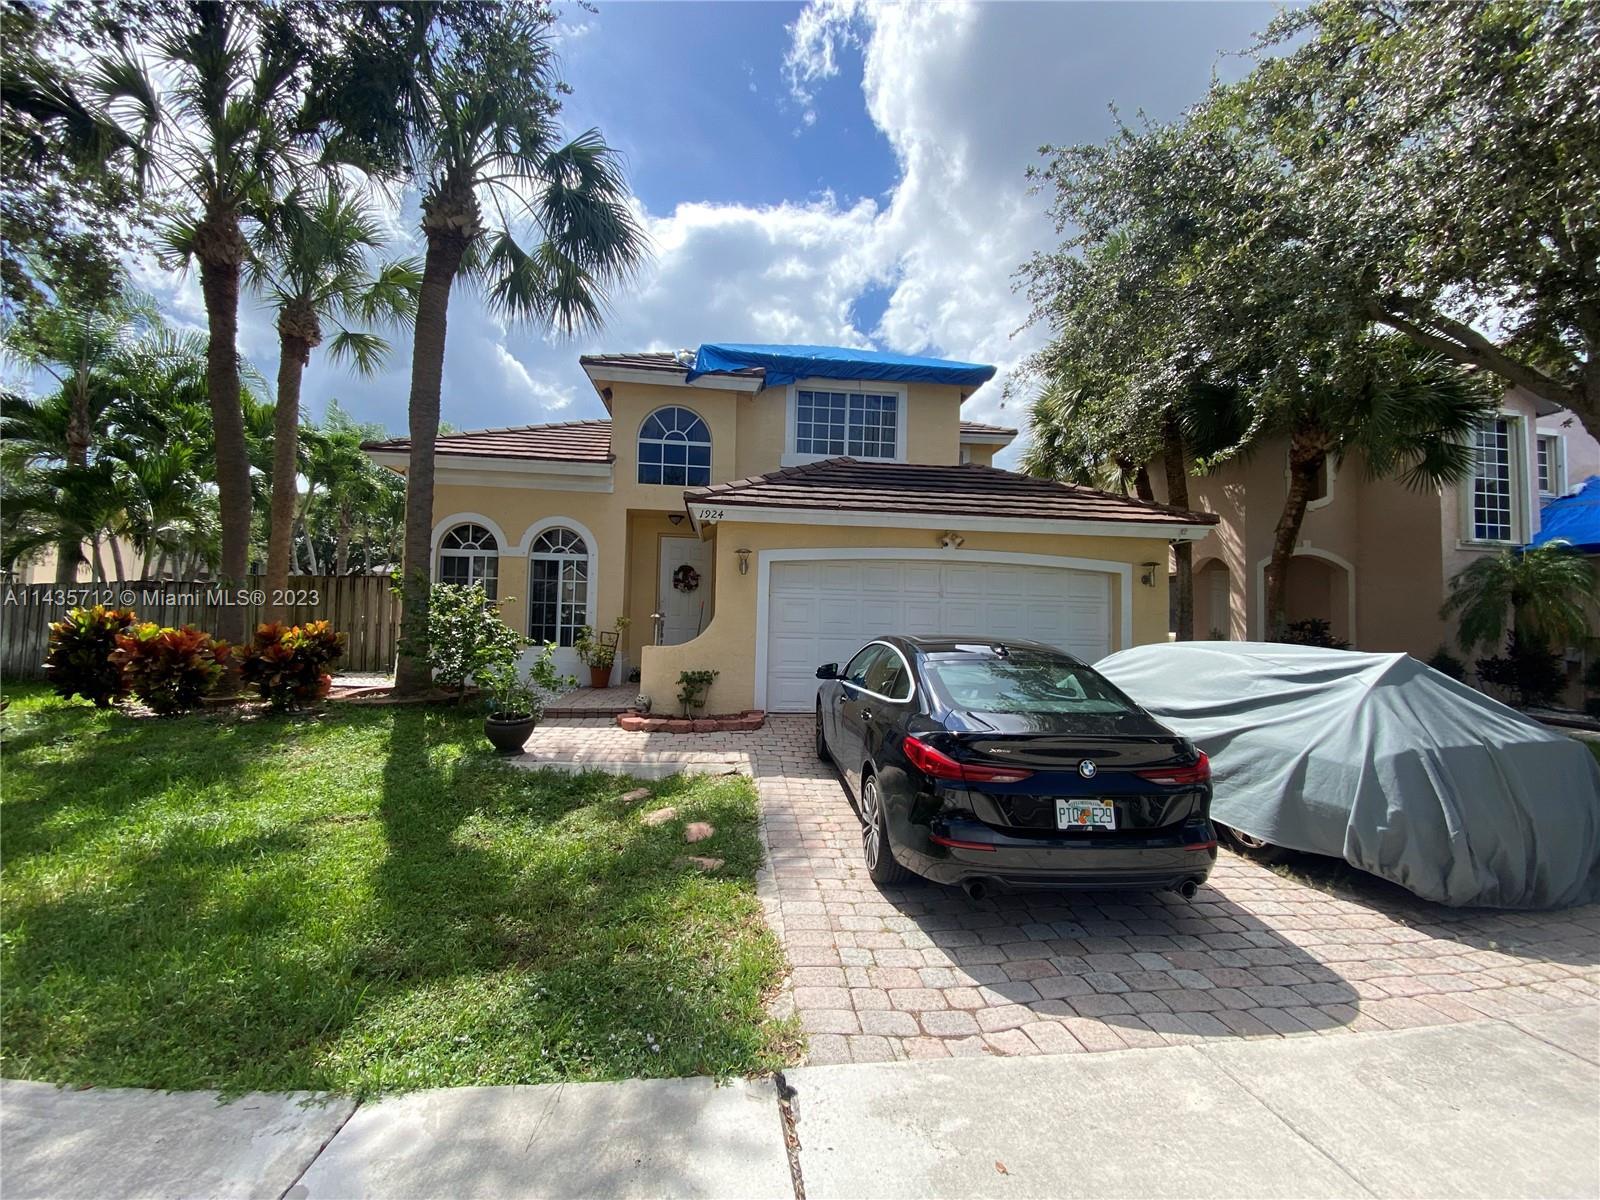 Photo of 1924 NW 99th Ave in Pembroke Pines, FL